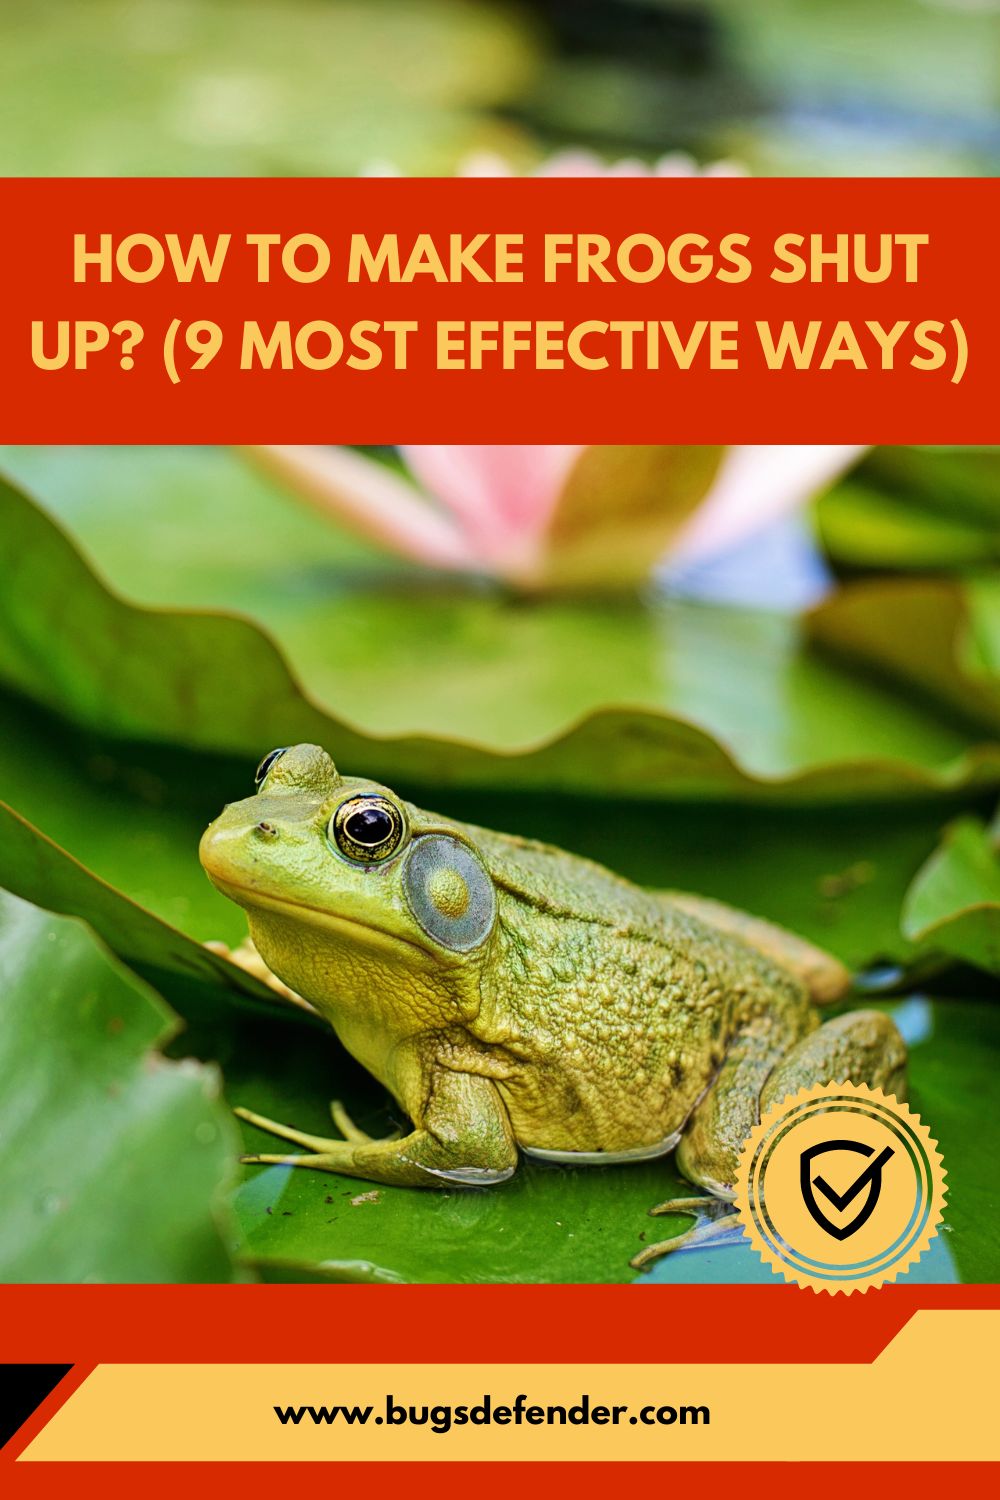 How To Make Frogs Shut Up? (9 Most Effective Ways) pin2